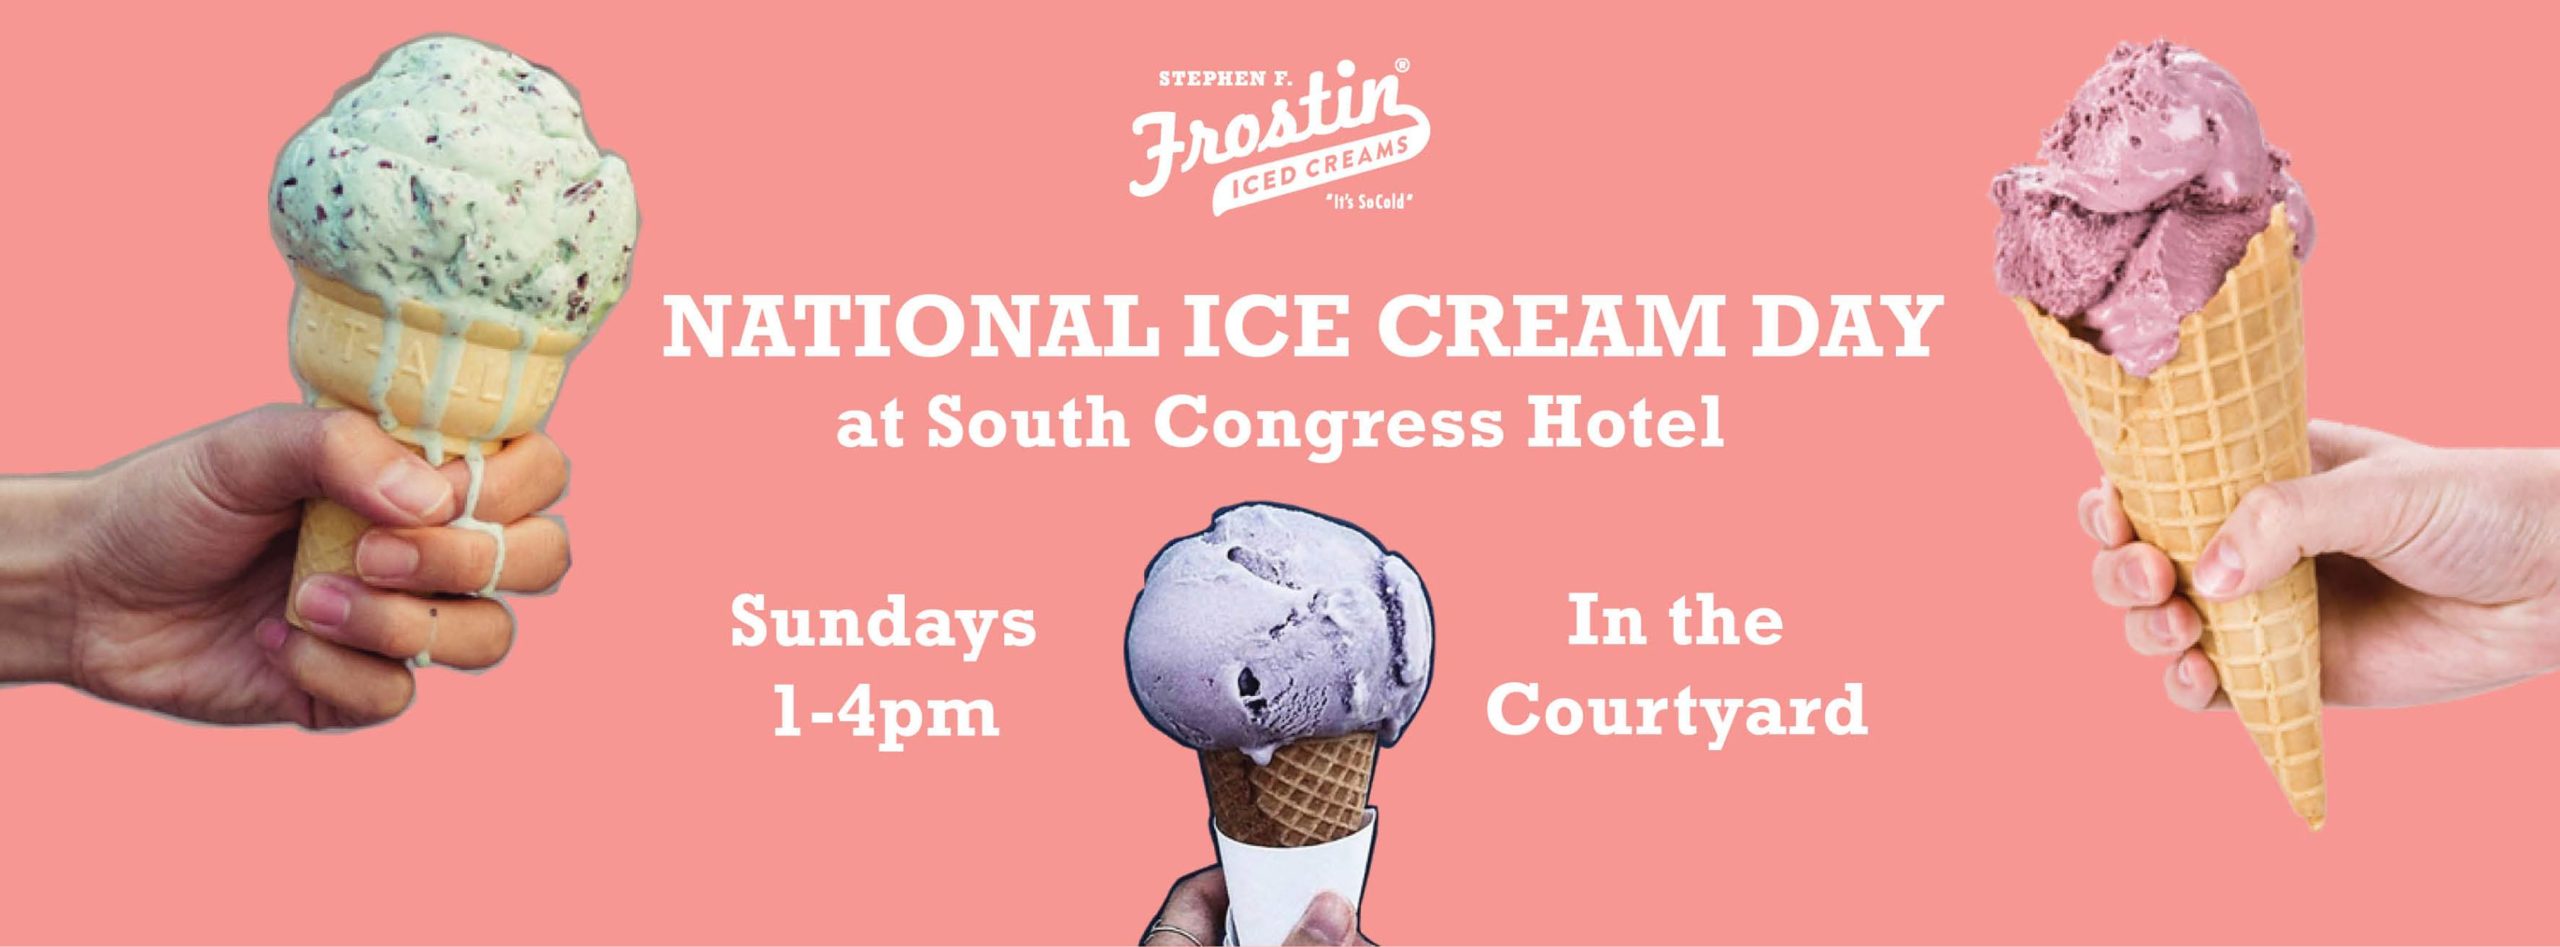 National Ice Cream Day at South Congress Hotel